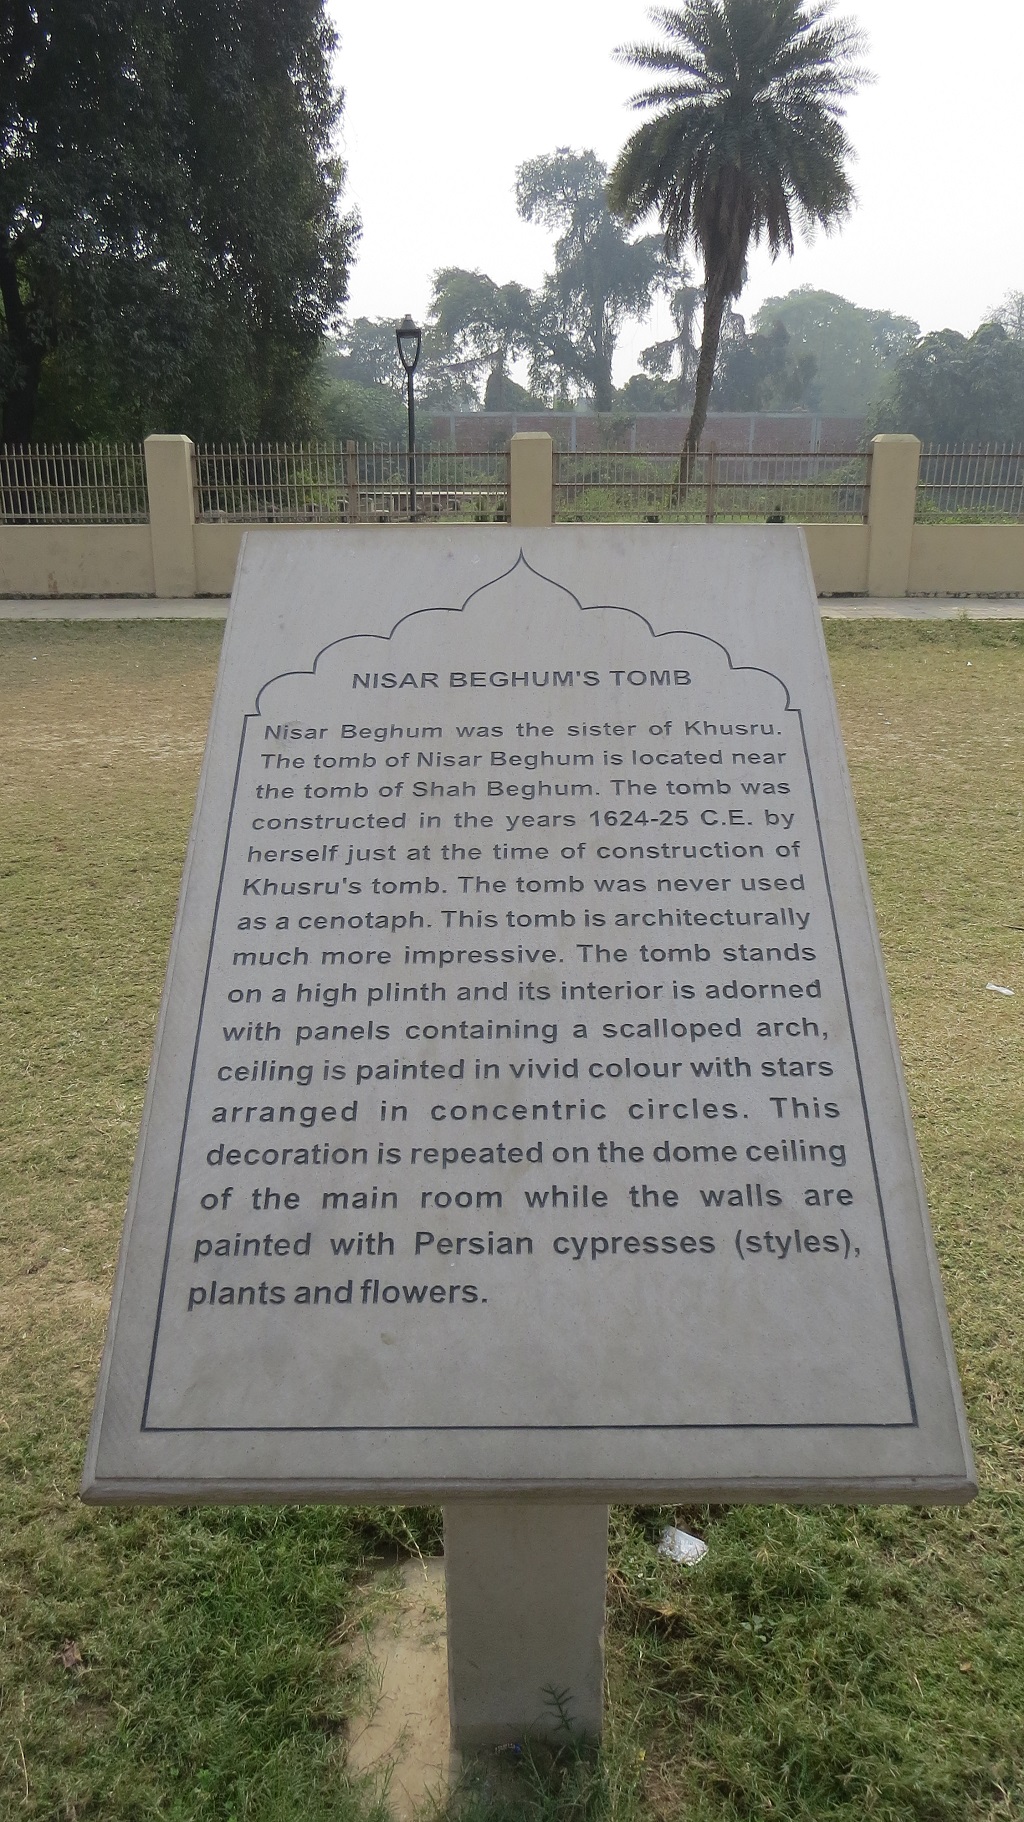 About: Nisar Beghum’s Tomb (1624-25 C.E.)